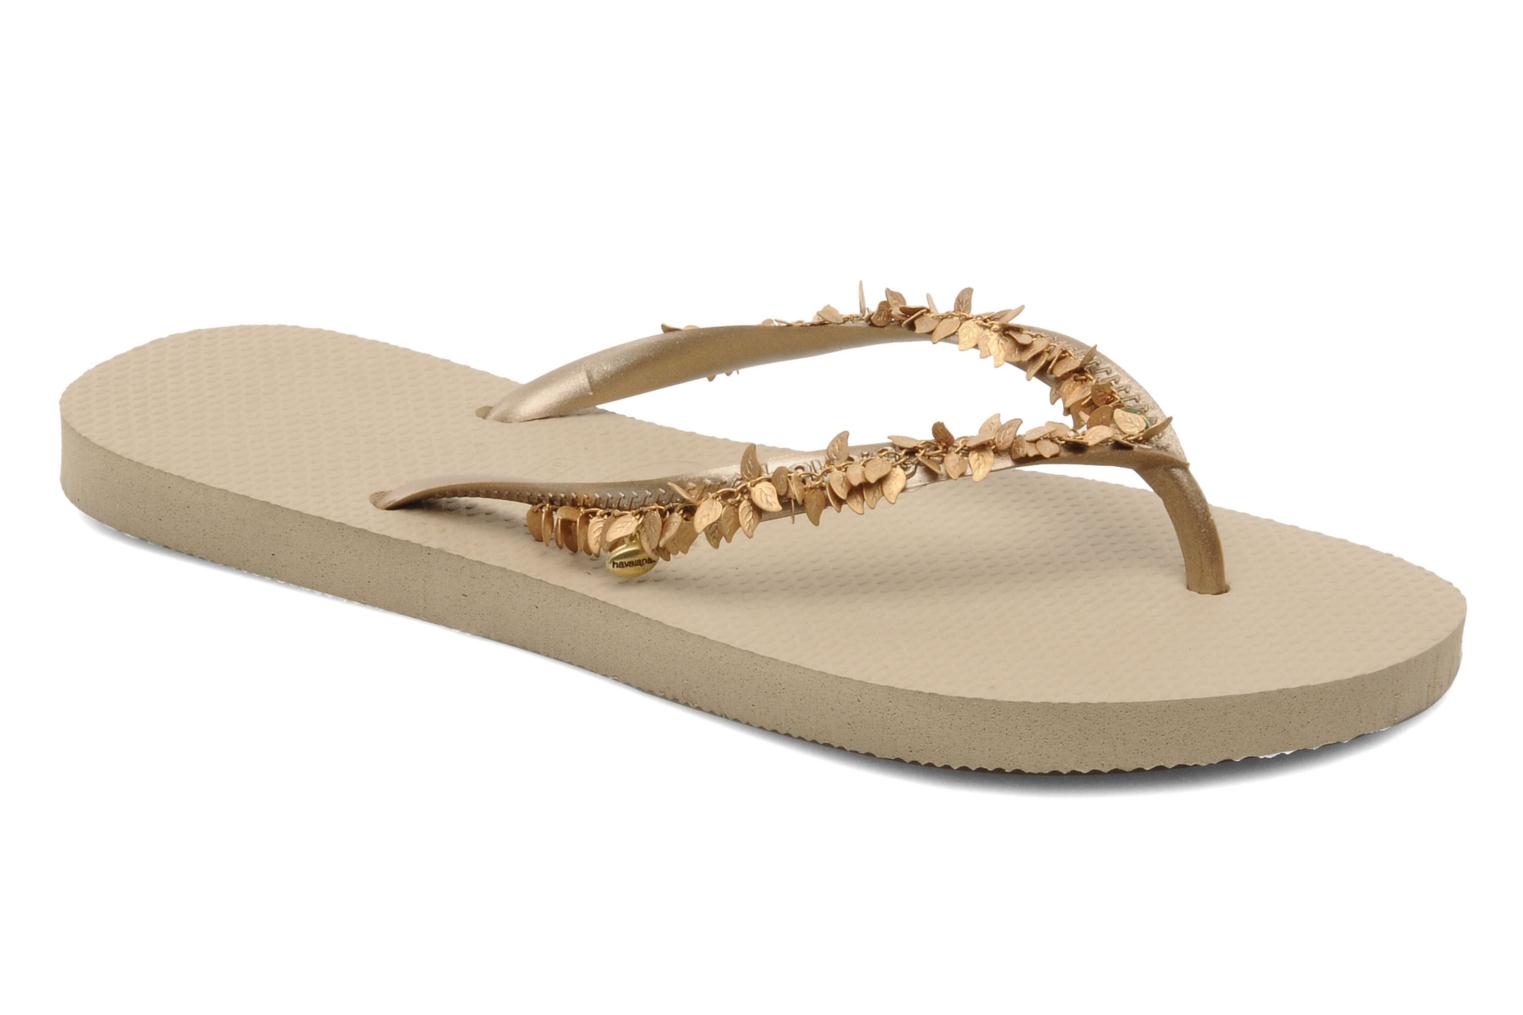 Havaianas Slim Leaves Flip flops in Bronze and Gold at Sarenza.co.uk ...